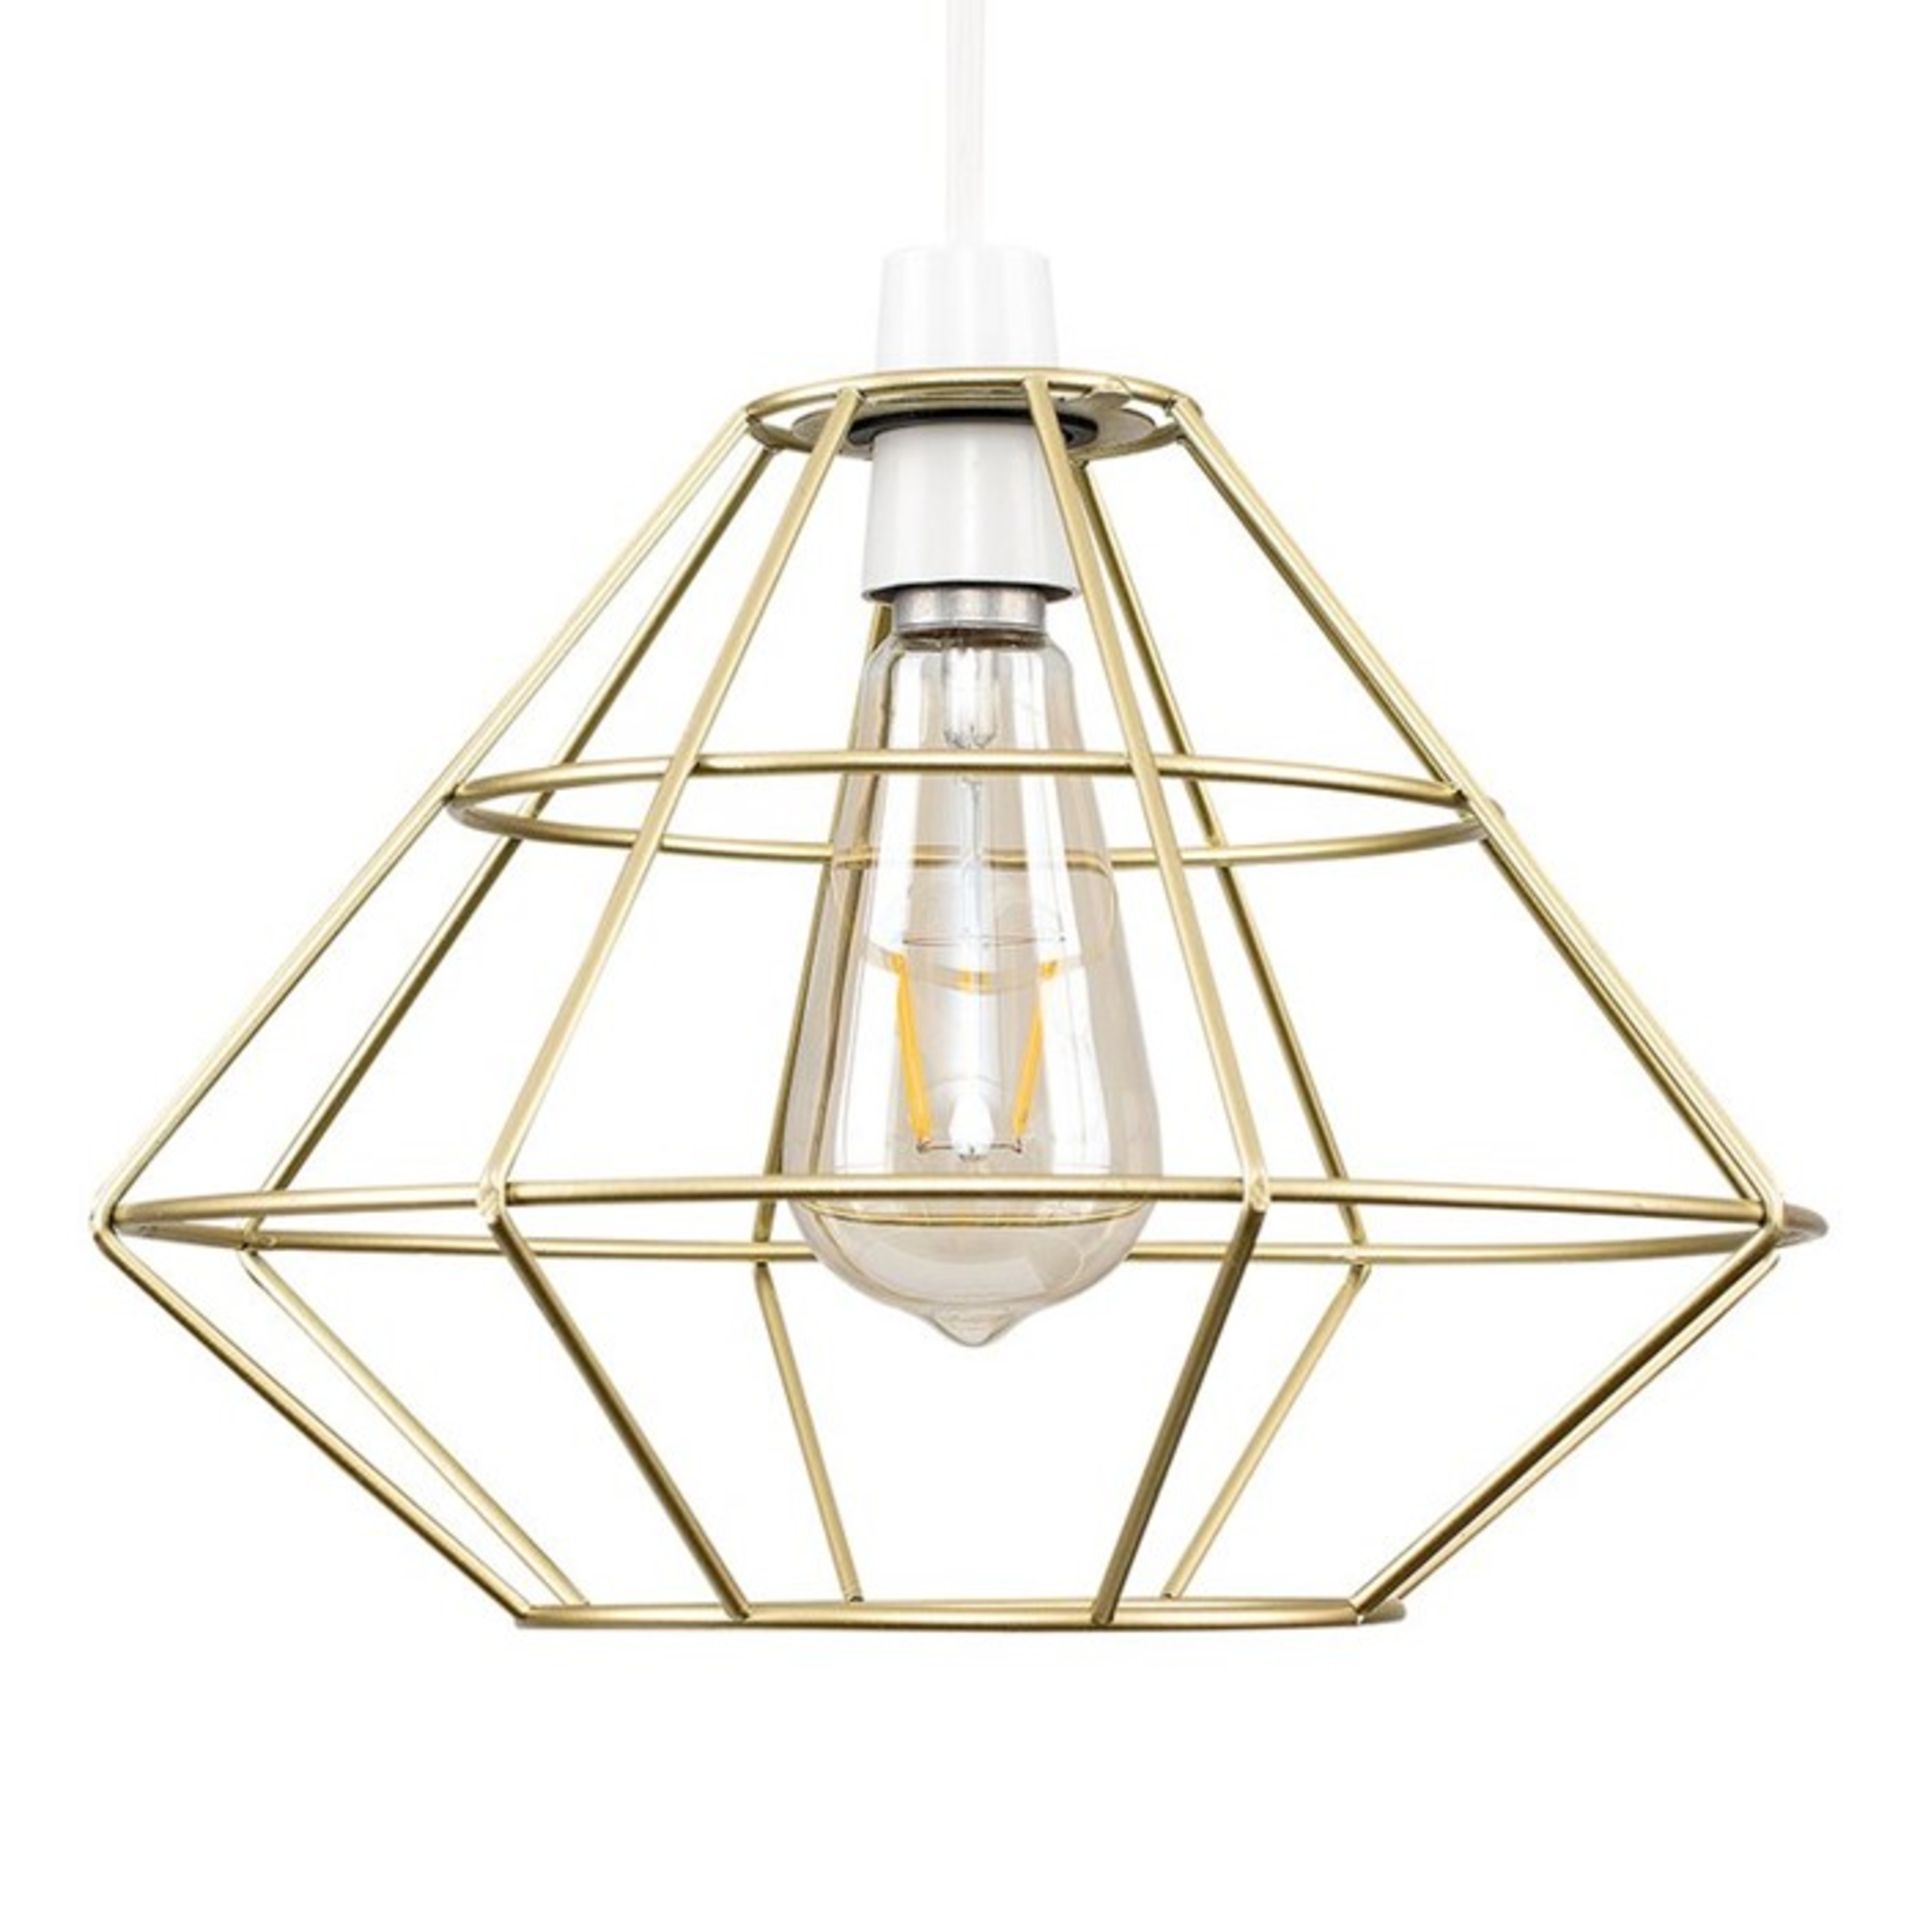 Norden Home, 30cm Metal Novelty Pendant Shade (GOLD / SHADE ONLY) - RRP £21.99 (MSUN3256.